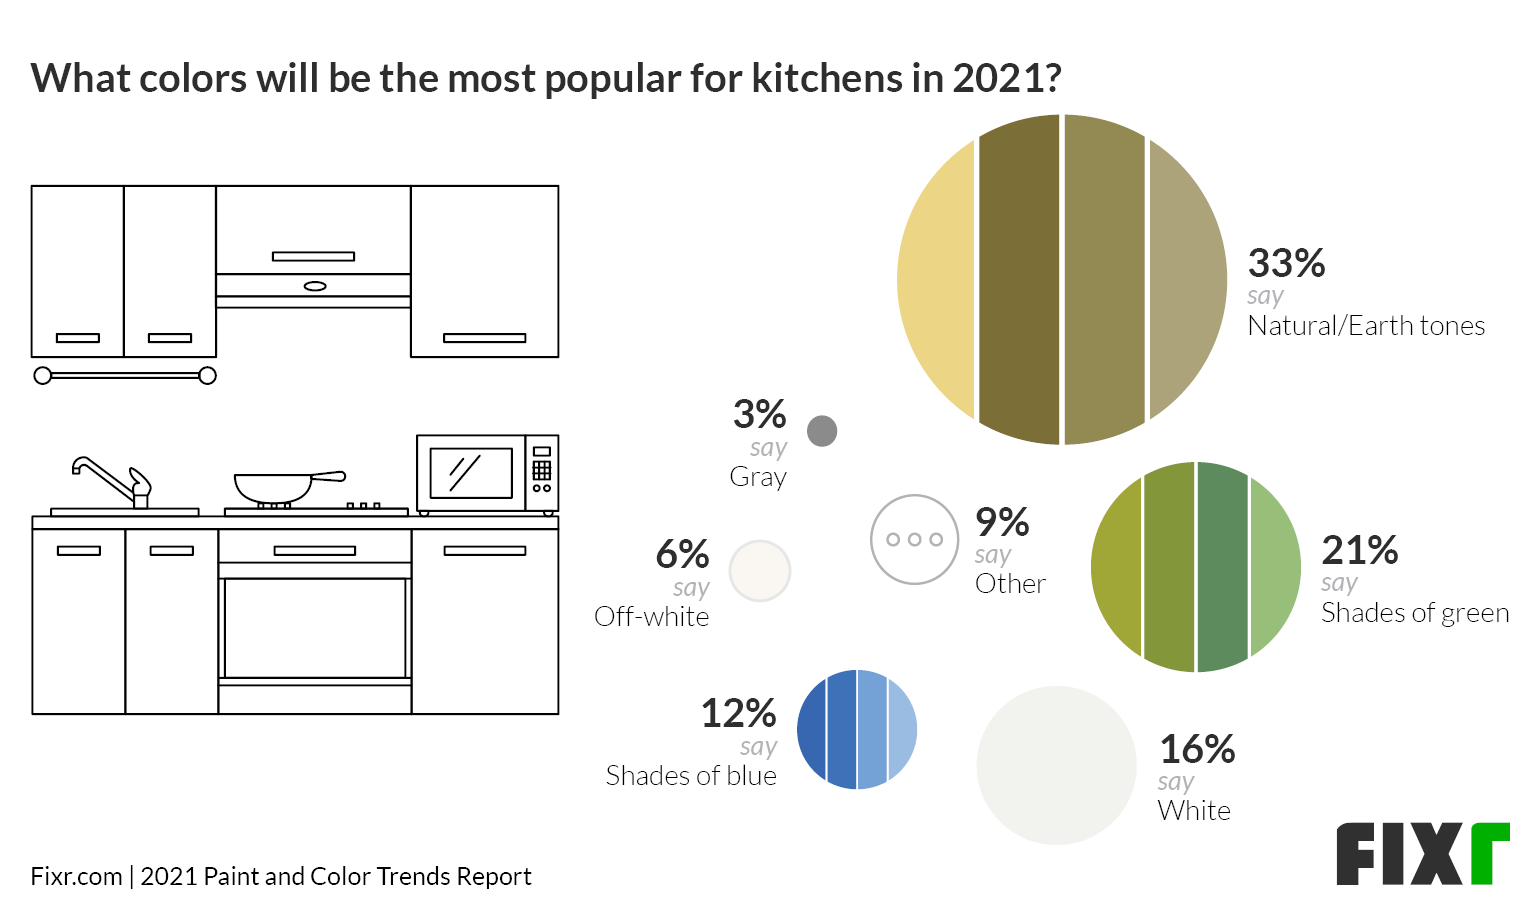 Paint & Color Trends 2021 - Most Popular Colors for Kitchens in 2021